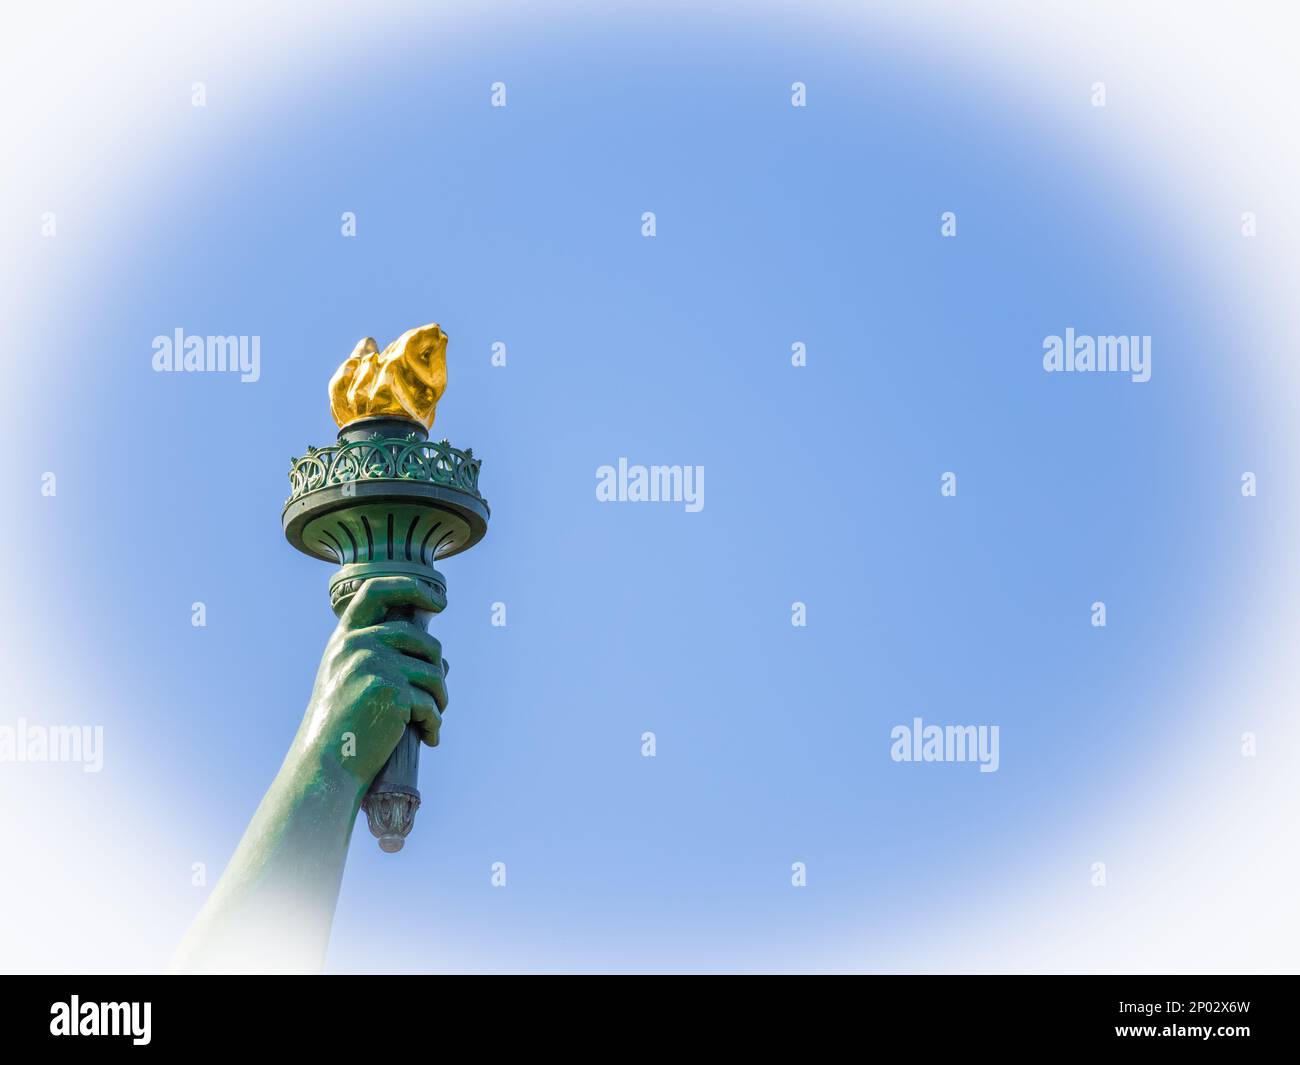 Colmar, France - March 29, 2022: The torch in the hand of the Statue of Liberty, designed by Frederic Auguste Bartholdi. Stock Photo